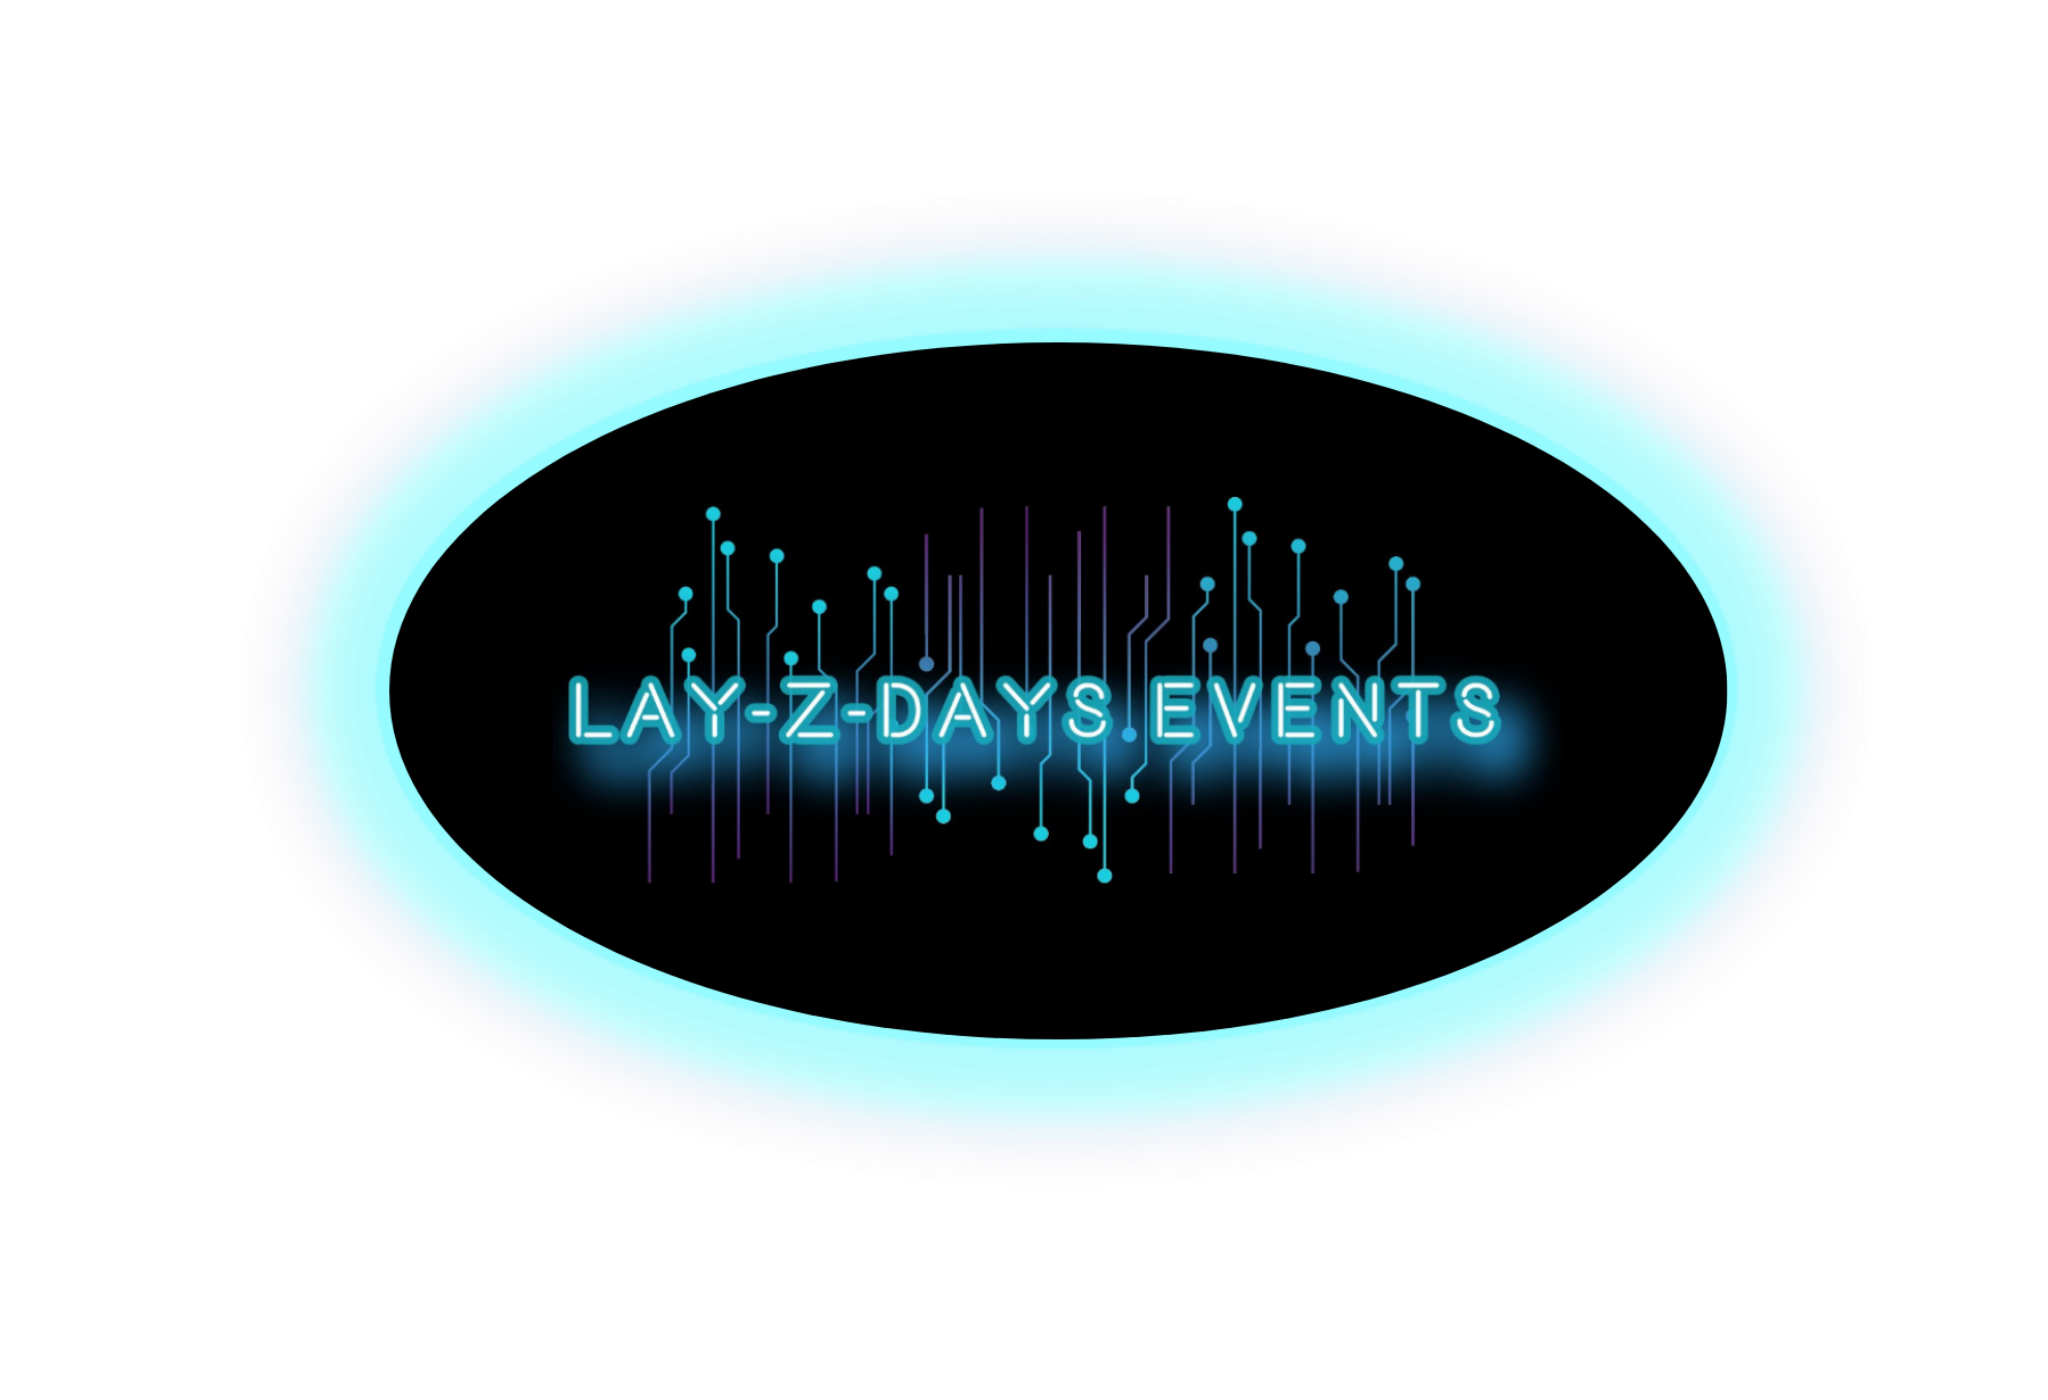 Logo of Lay-z-days Events